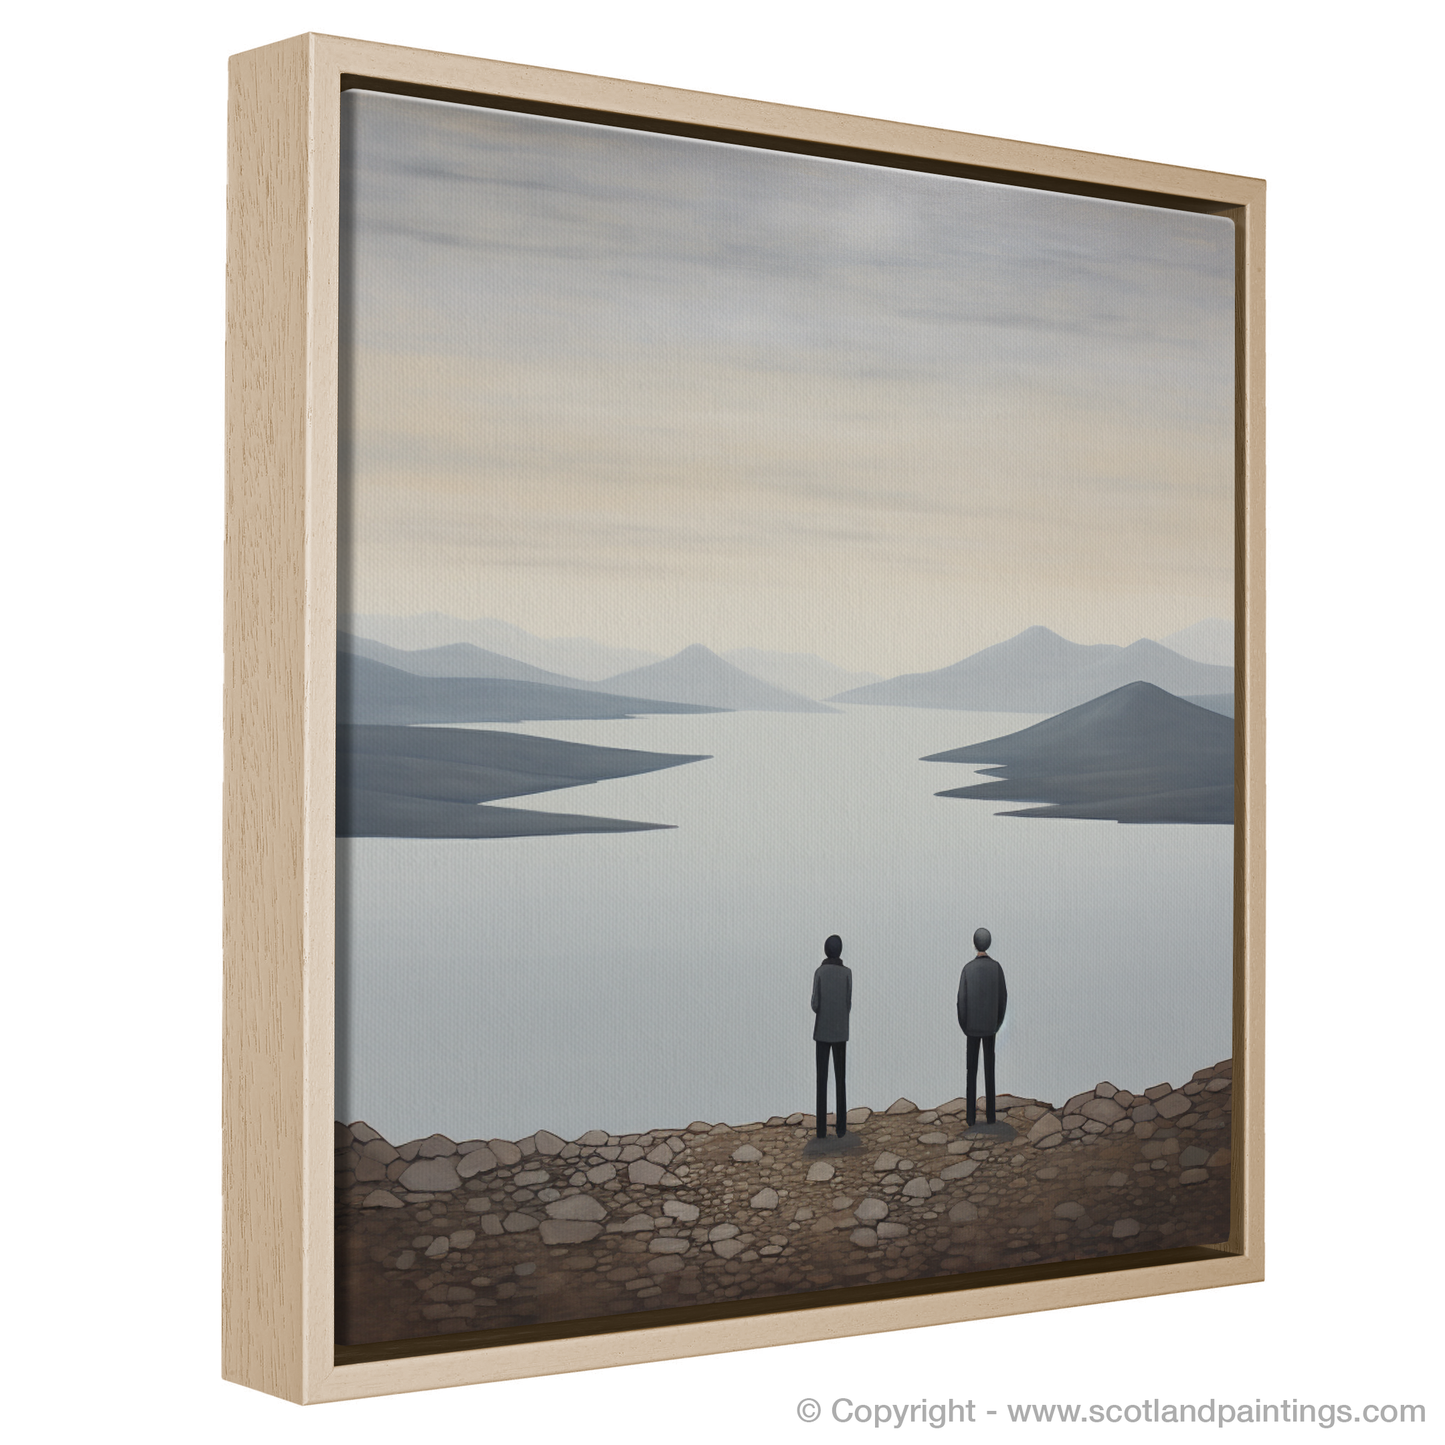 Painting and Art Print of Two hikers looking out on Loch Lomond entitled "Hikers' View: the Essence of Loch Lomond".